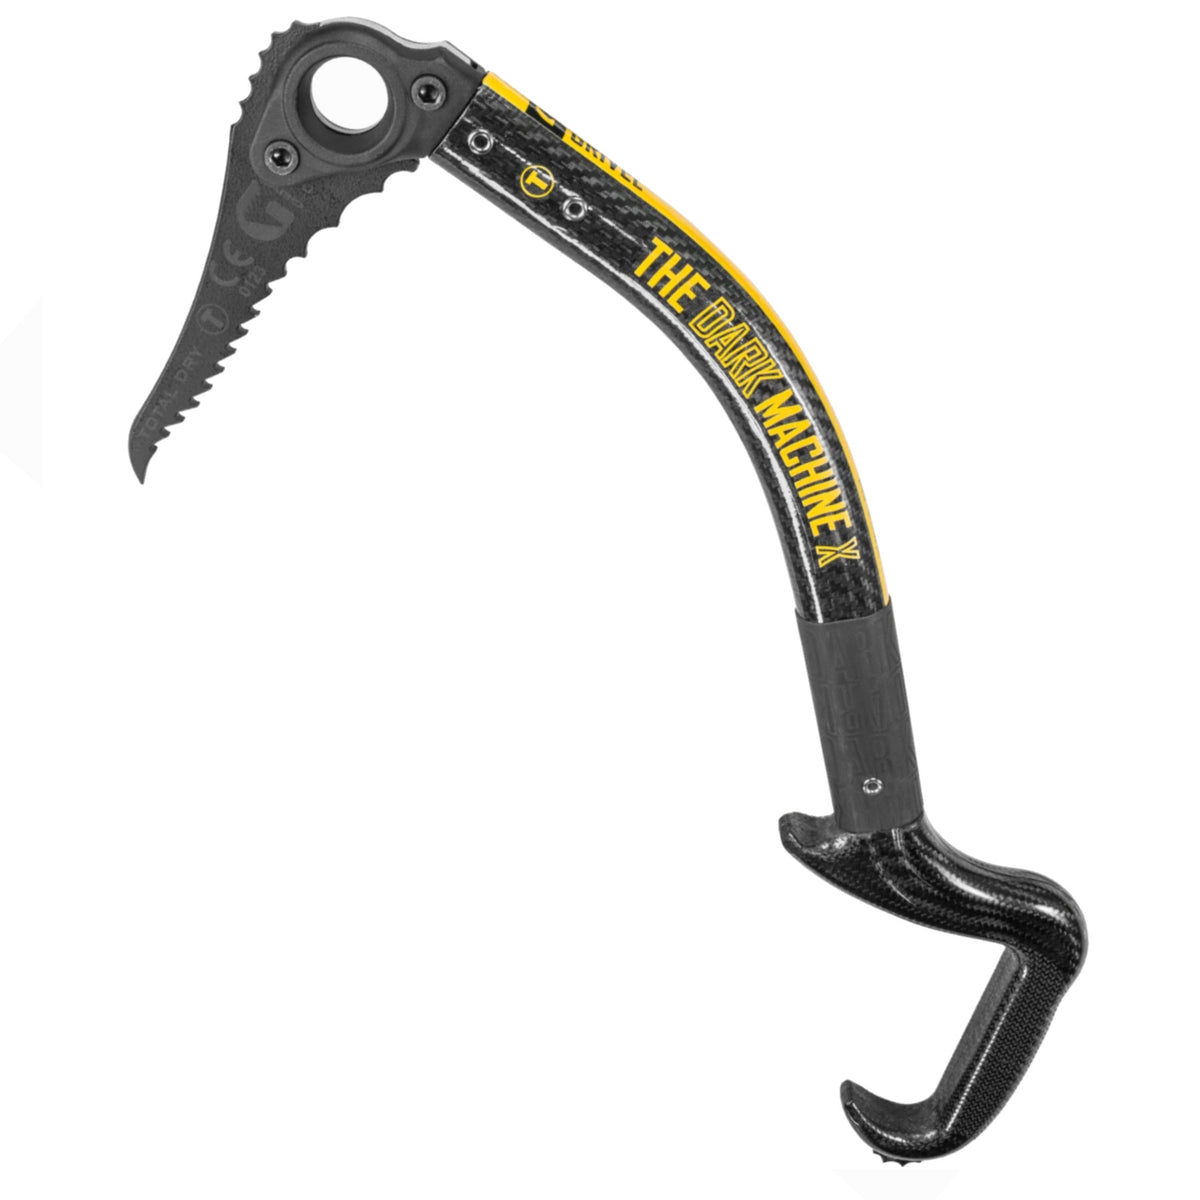 Grivel Dark Machine X ice axe, side view shown in black/yellow colours